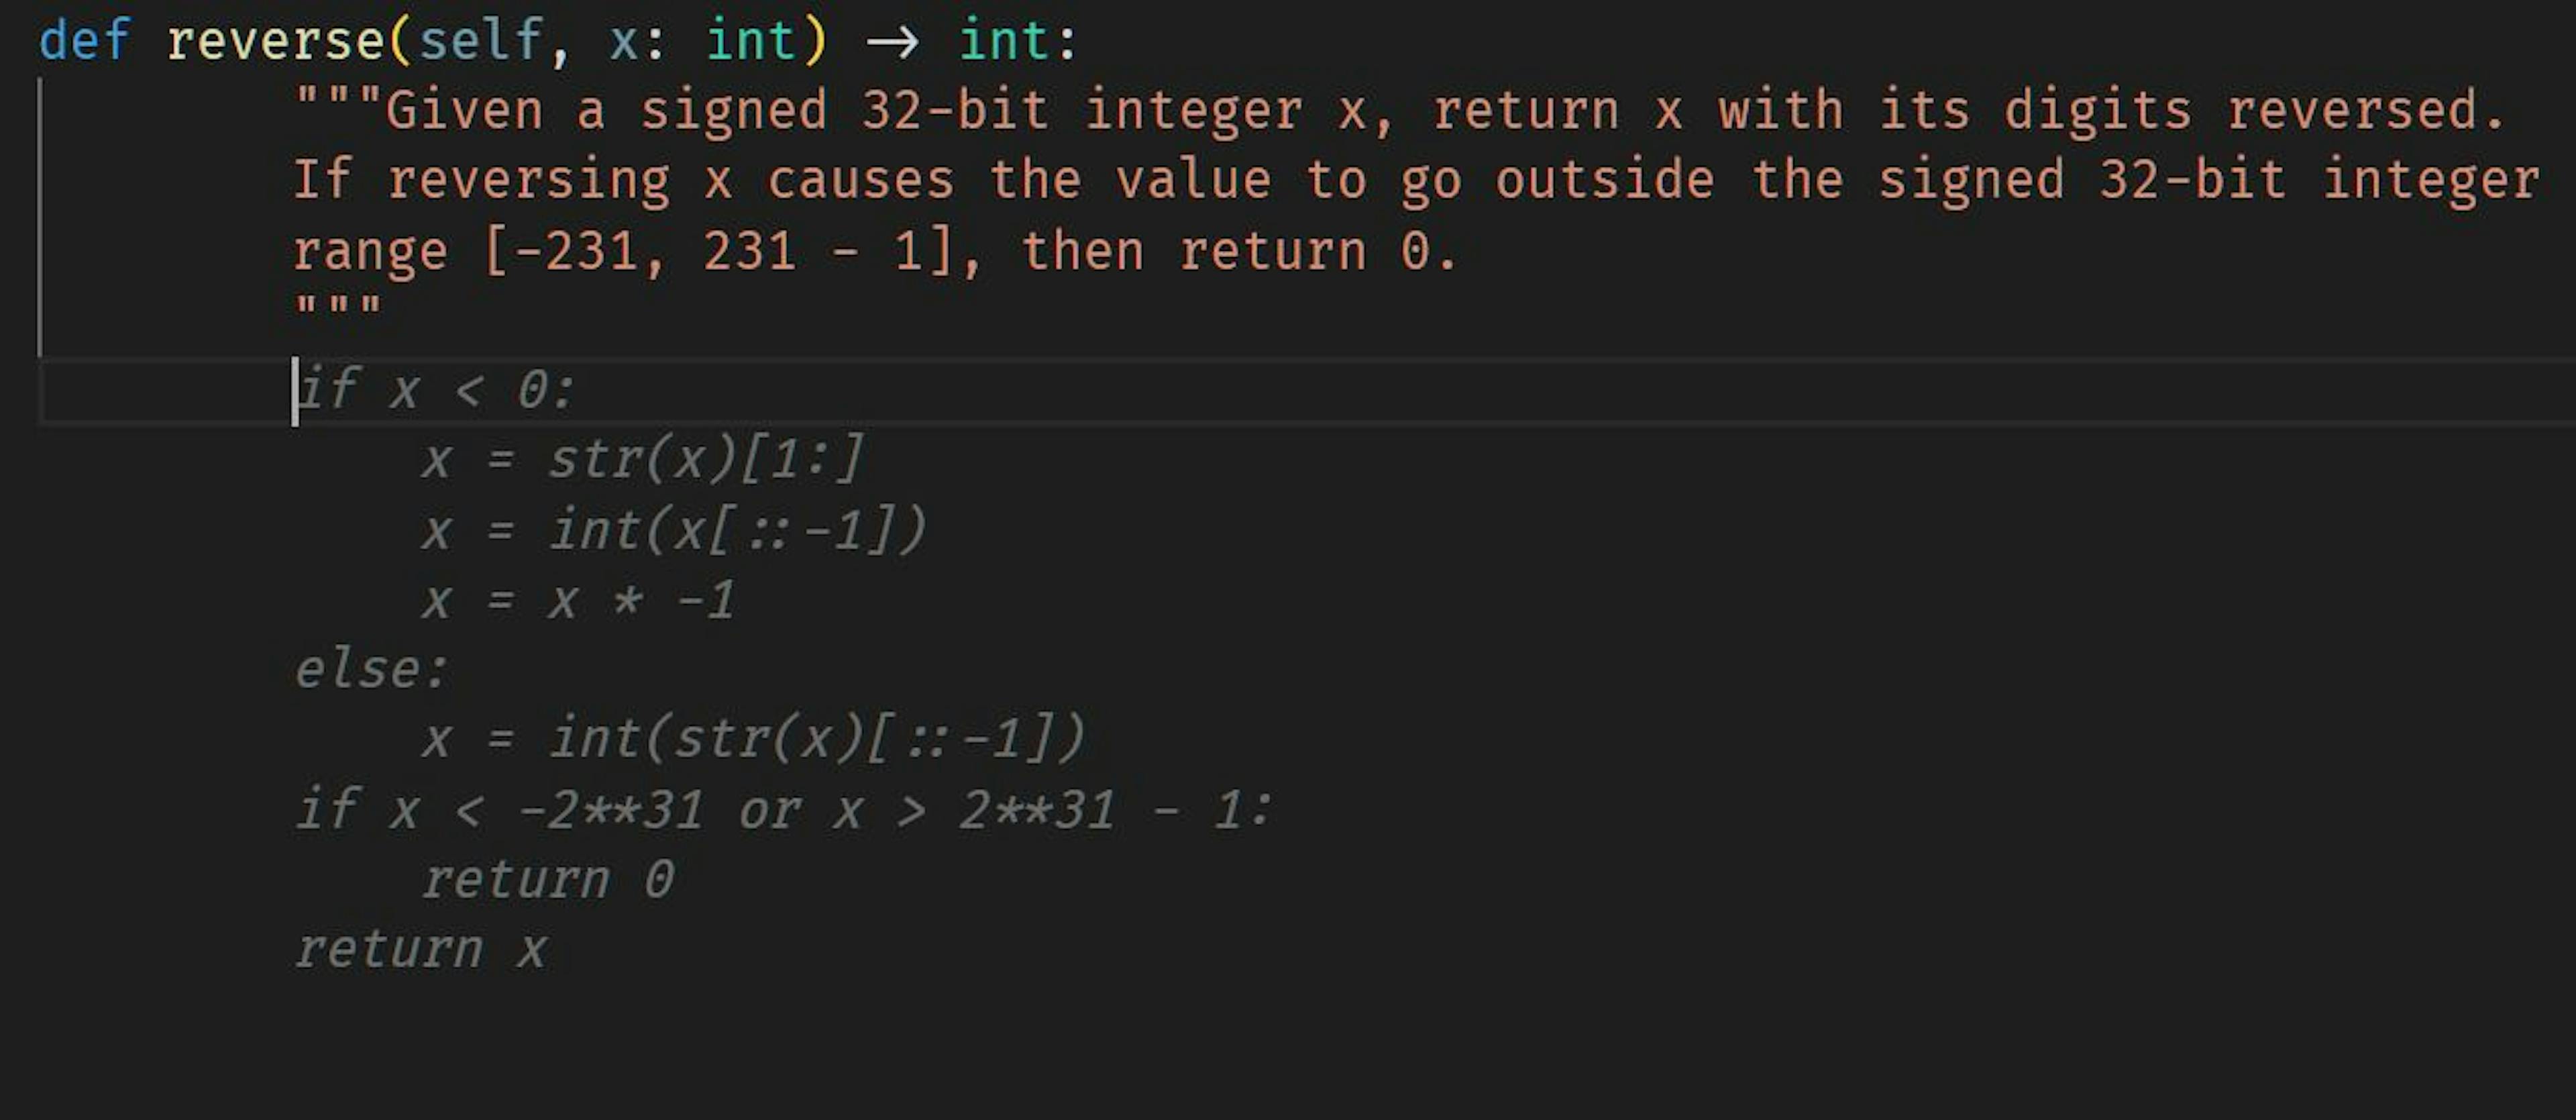 A function suggested by Copilot based on a given doc string